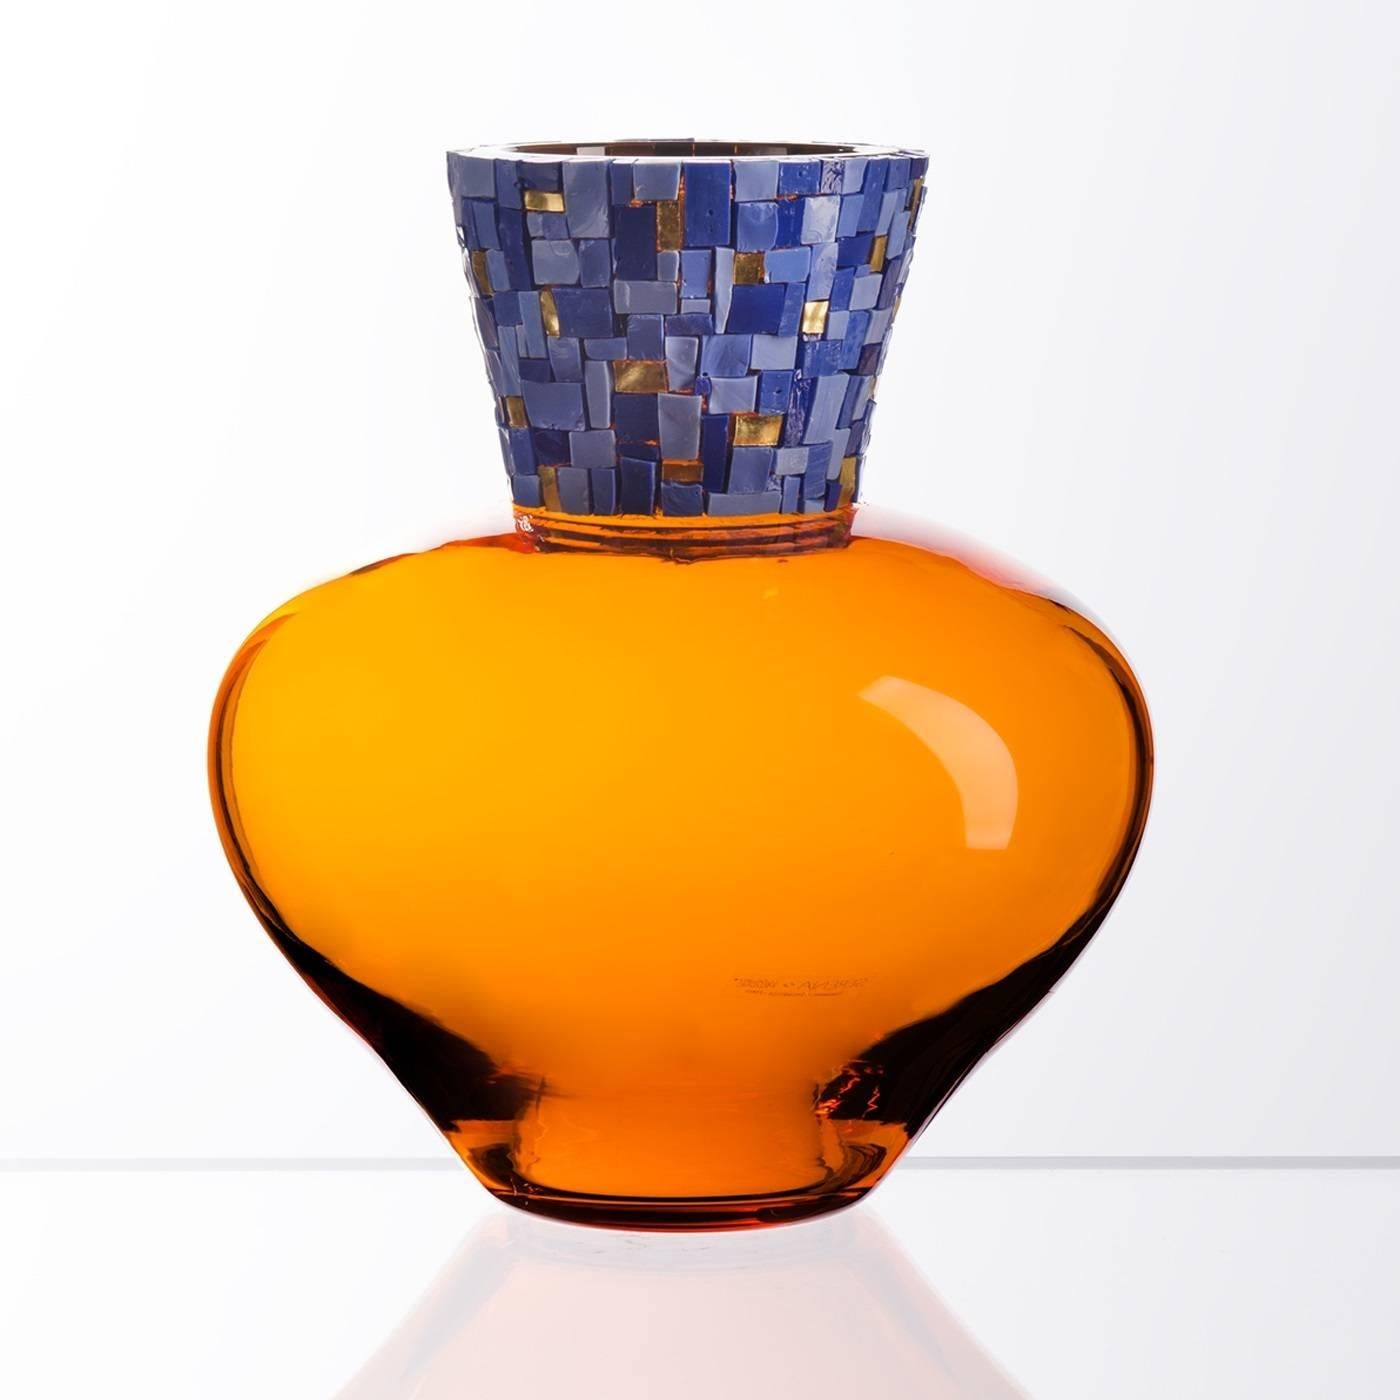 Murano master glass-blowers are renowned all-over the world for their craftsmanship that allows them to create stunning artistic pieces of great beauty and value. An elaborate mosaic in rich blue and gold colors graces the neck of this refined